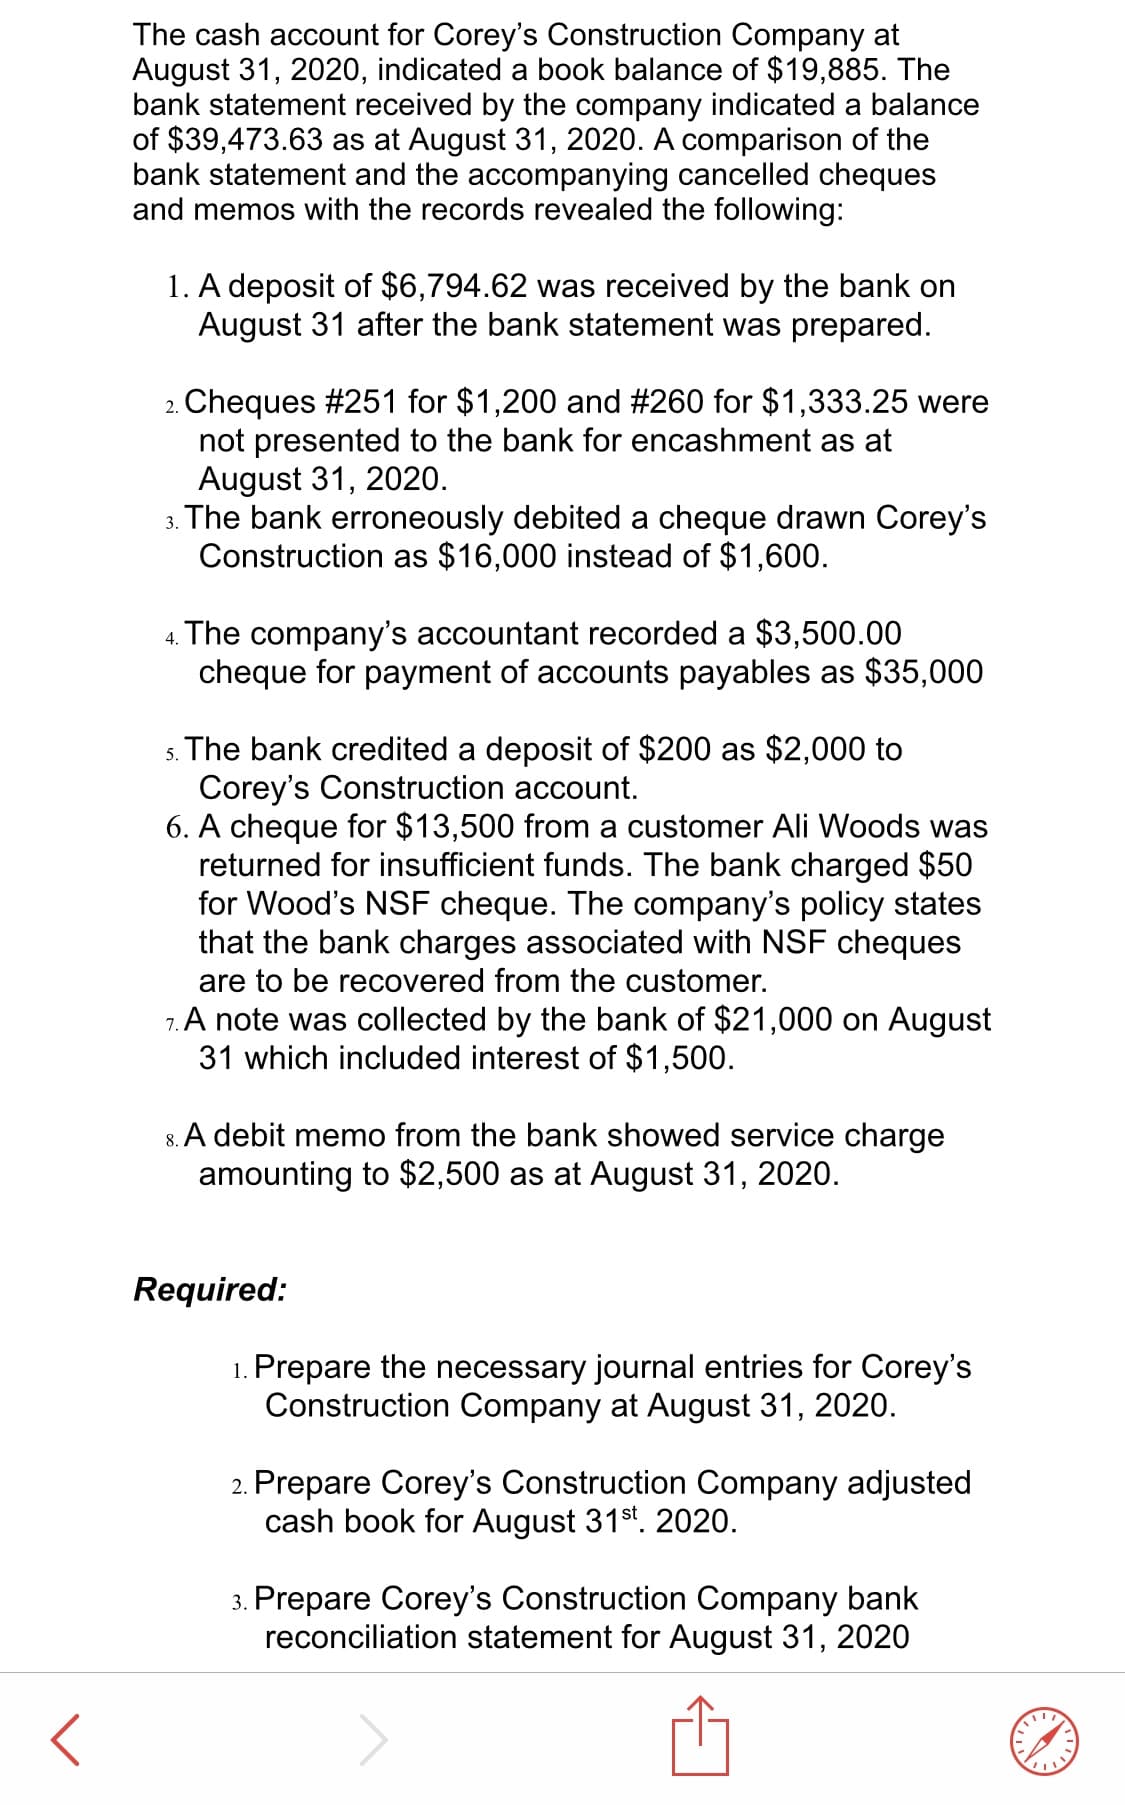 The cash account for Corey's Construction Company at
August 31, 2020, indicated a book balance of $19,885. The
bank statement received by the company indicated a balance
of $39,473.63 as at August 31, 2020. A comparison of the
bank statement and the accompanying cancelled cheques
and memos with the records revealed the following:
1. A deposit of $6,794.62 was received by the bank on
August 31 after the bank statement was prepared.
2. Cheques #251 for $1,200 and #260 for $1,333.25 were
not presented to the bank for encashment as at
August 31, 2020.
3. The bank erroneously debited a cheque drawn Corey's
Construction as $16,000 instead of $1,600.
4. The company's accountant recorded a $3,500.00
cheque for payment of accounts payables as $35,000
s. The bank credited a deposit of $200 as $2,000 to
Corey's Construction account.
6. A cheque for $13,500 from a customer Ali Woods was
returned for insufficient funds. The bank charged $50
for Wood's NSF cheque. The company's policy states
that the bank charges associated with NSF cheques
are to be recovered from the customer.
7. A note was collected by the bank of $21,000 on August
31 which included interest of $1,500.
8. A debit memo from the bank showed service charge
amounting to $2,500 as at August 31, 2020.
Required:
1. Prepare the necessary journal entries for Corey's
Construction Company at August 31,
2020.
2. Prepare Corey's Construction Company adjusted
cash book for August 31st. 2020.
3. Prepare Corey's Construction Company bank
reconciliation statement for August 31,
2020
